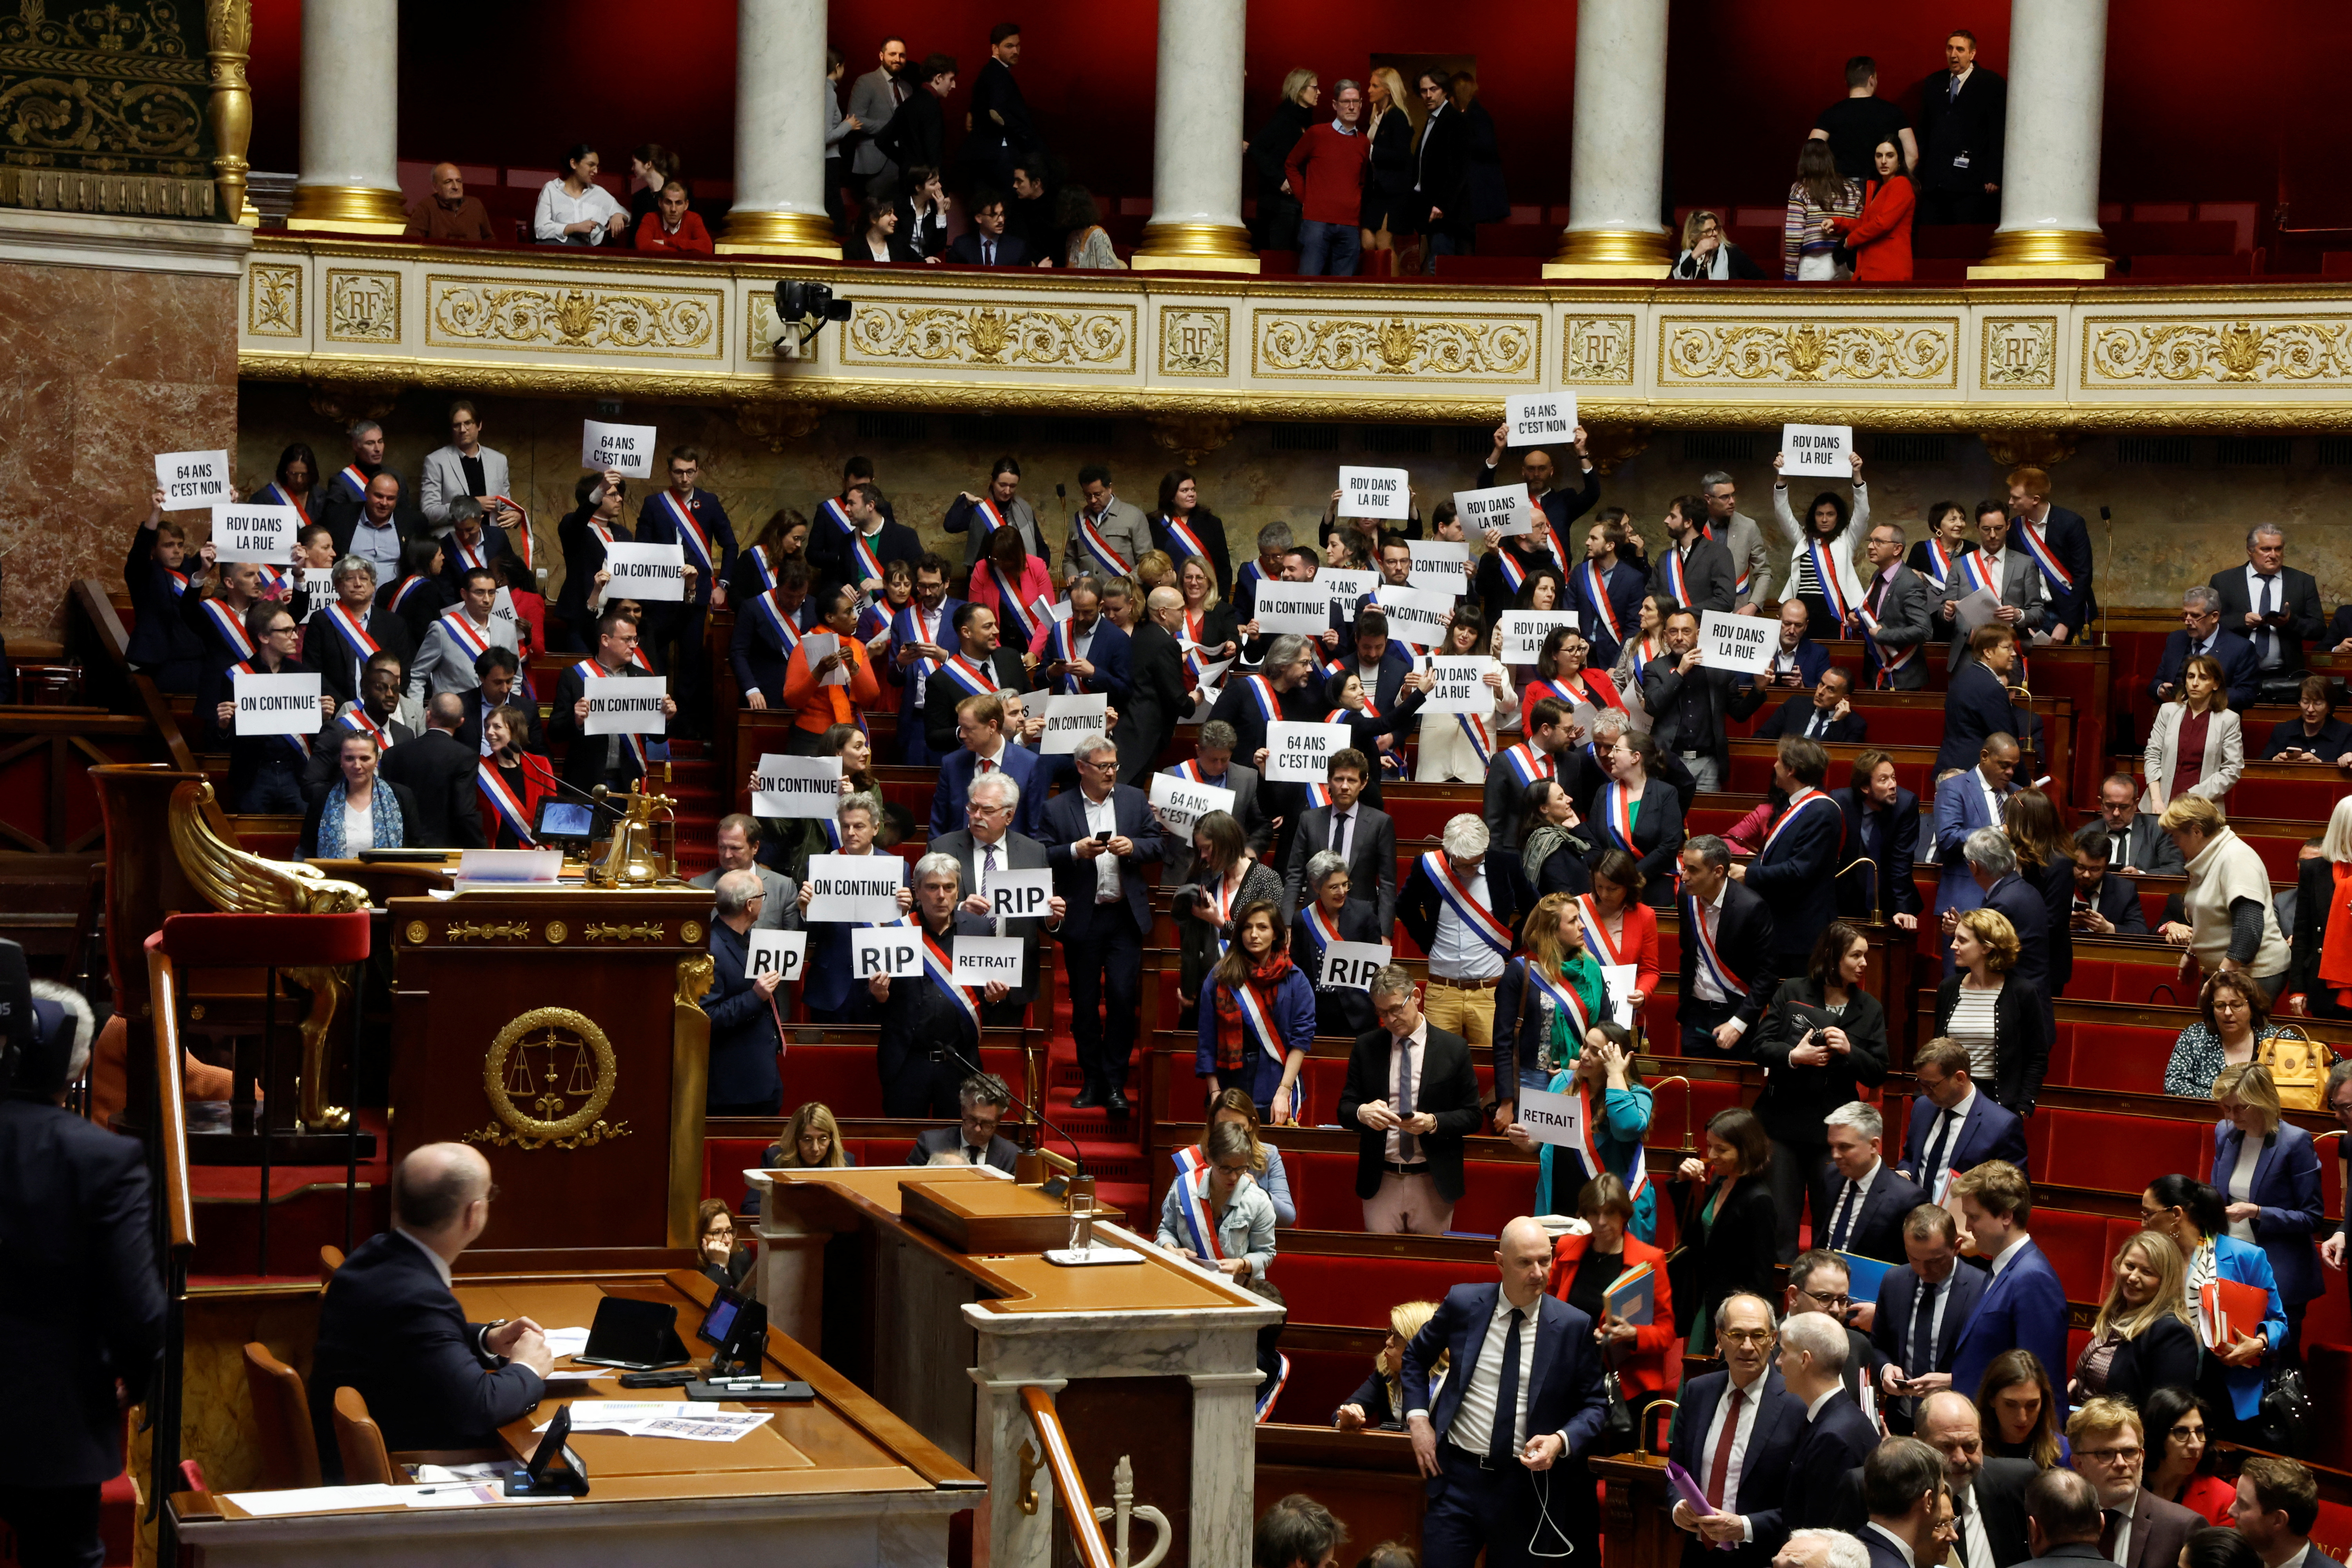 No-confidence vote on pension reform at the National Assembly in Paris